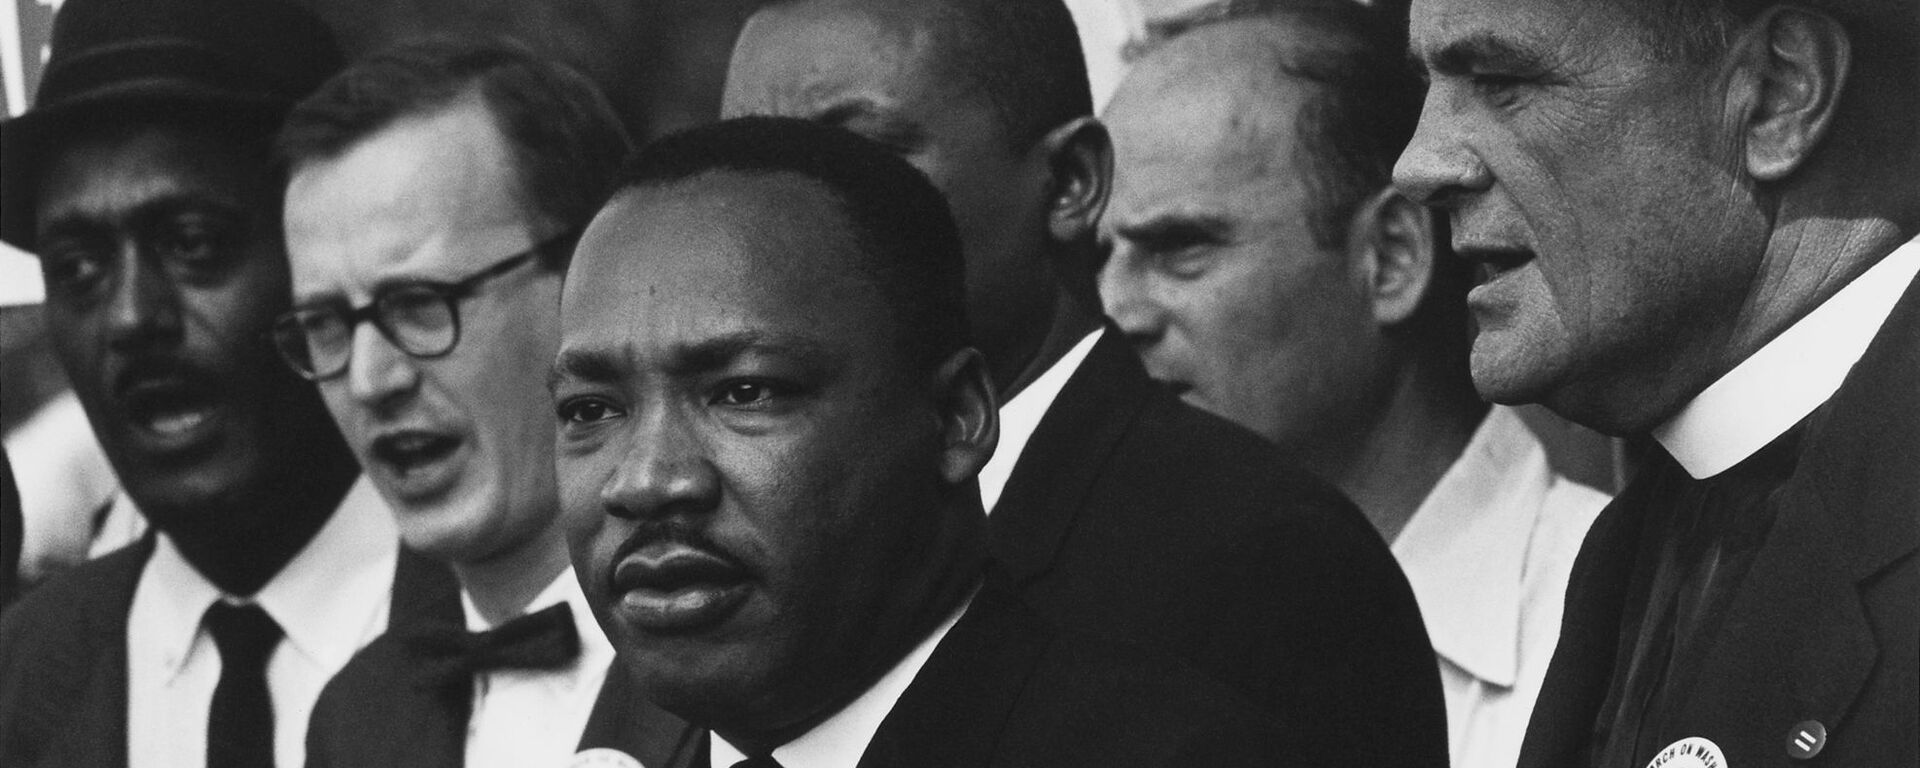 Martin Luther King Jr. during the 1963 March on Washington for Jobs and Freedom, during which he delivered his historic I Have a Dream speech, calling for an end to racism. - Sputnik International, 1920, 16.01.2023